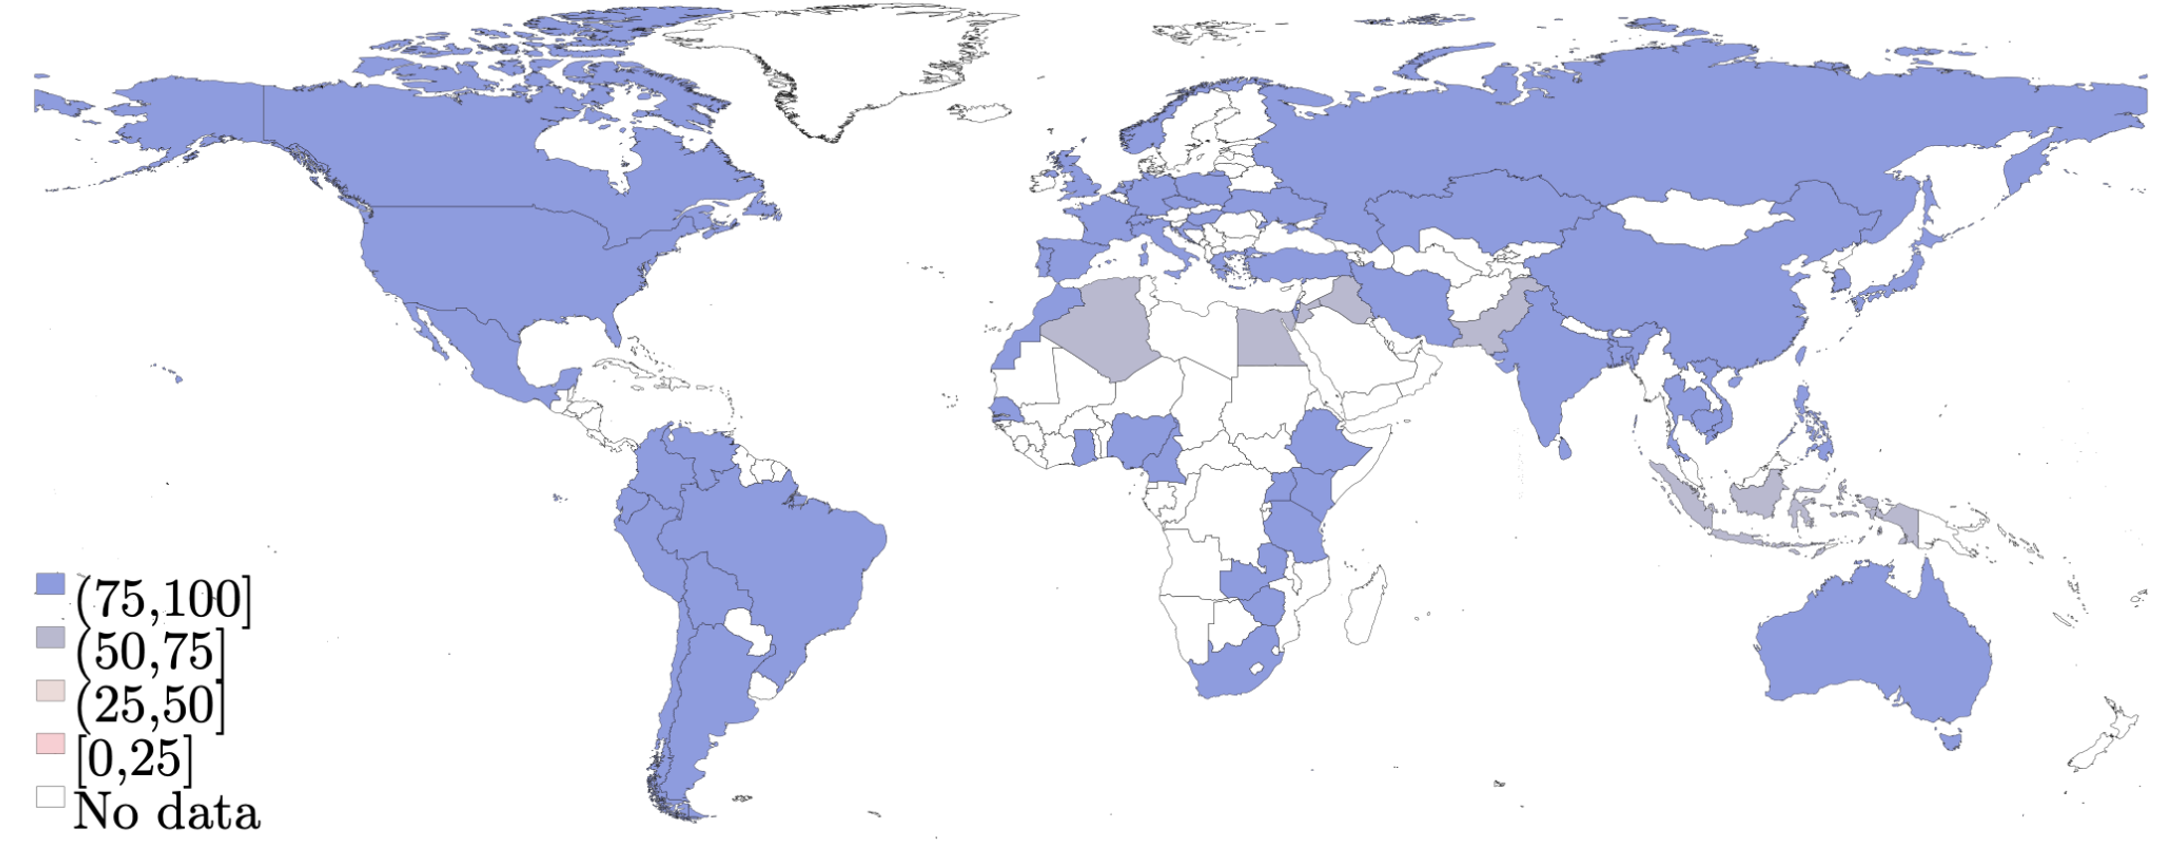 Figure 1 Actual support for basic rights around the world